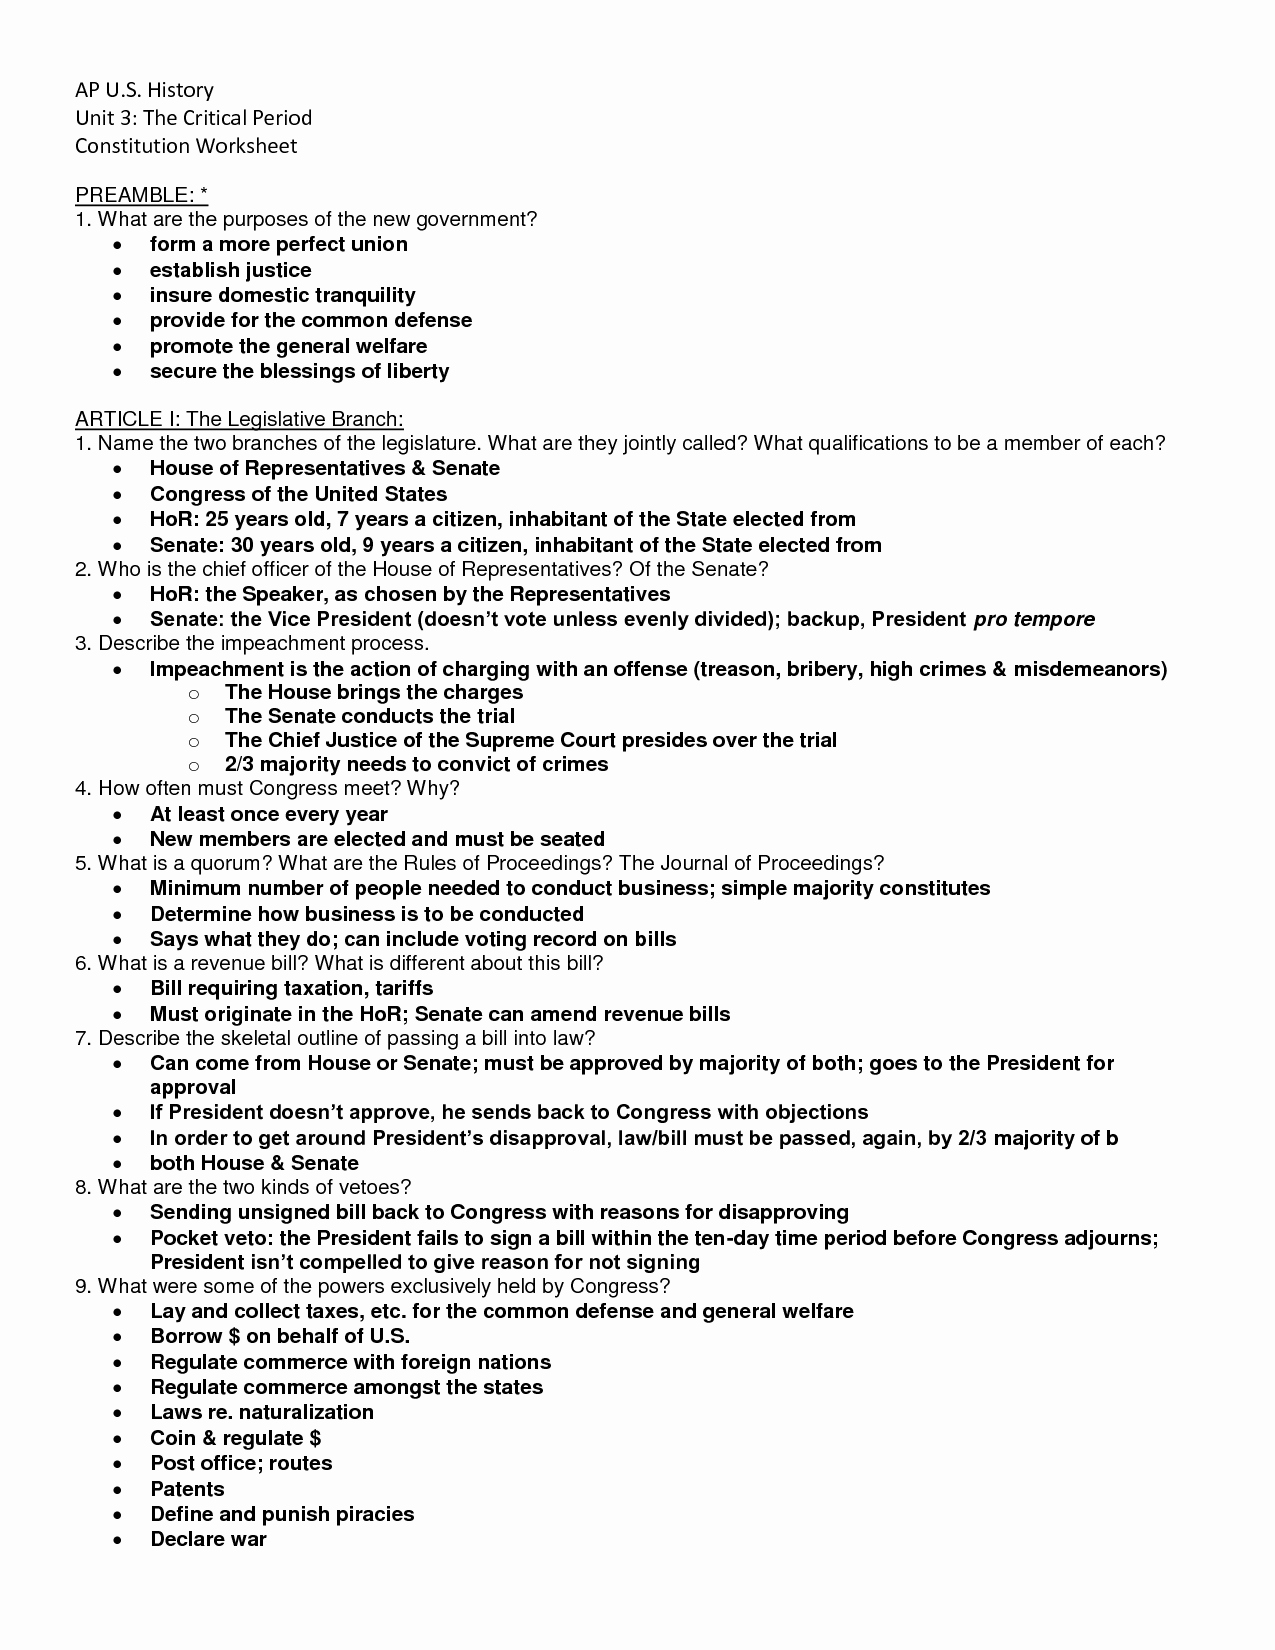 Anatomy Of the Constitution Worksheet Awesome Worksheet the Us Constitution Worksheet Worksheet Fun